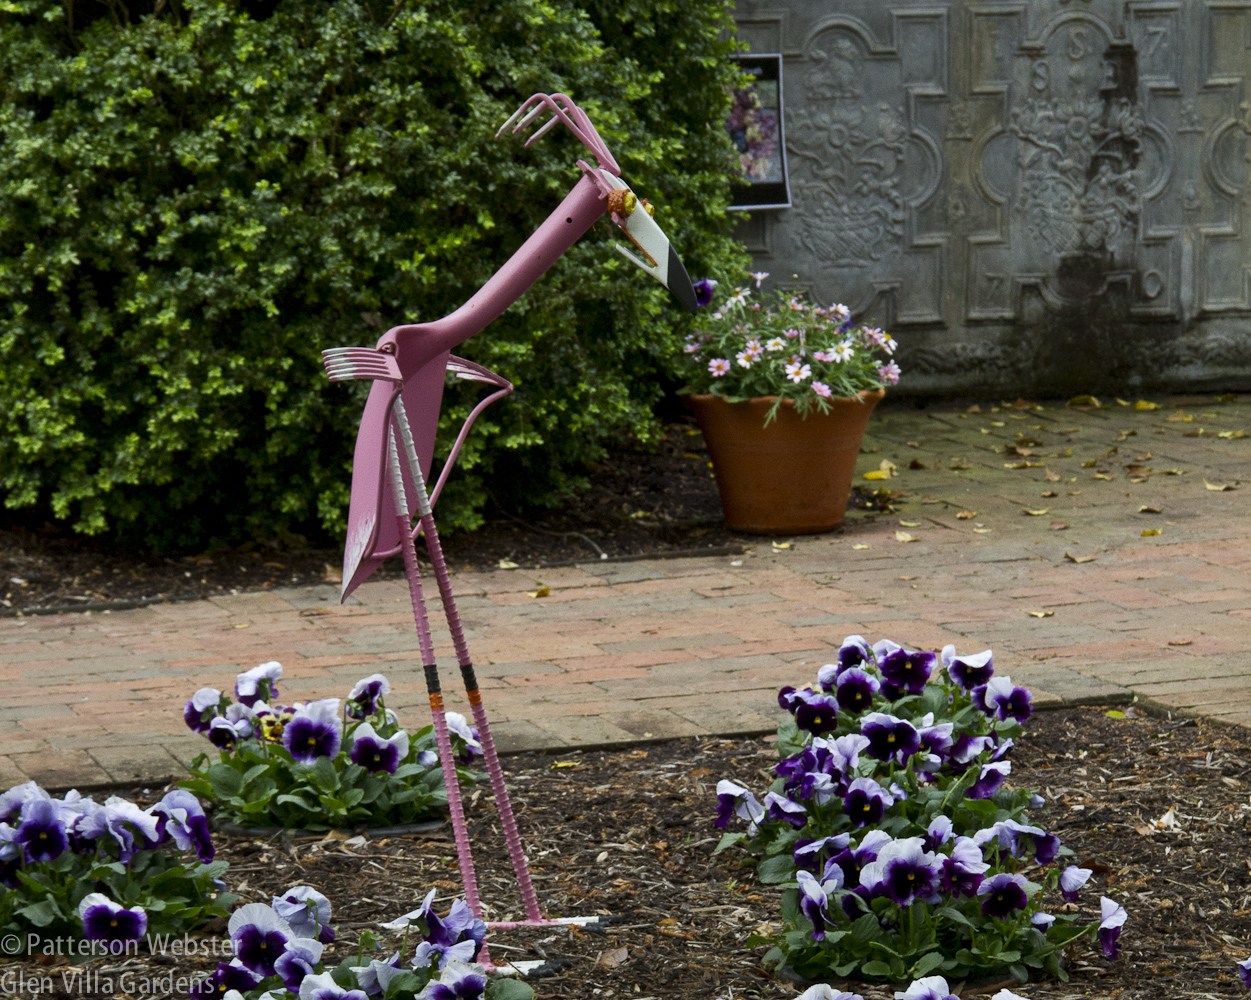 At Mt Cuba, an American garden that specializes in plants of the mid-Atlantic states, a pink flamingo made of spades and trowels seems decidedly out of place.  